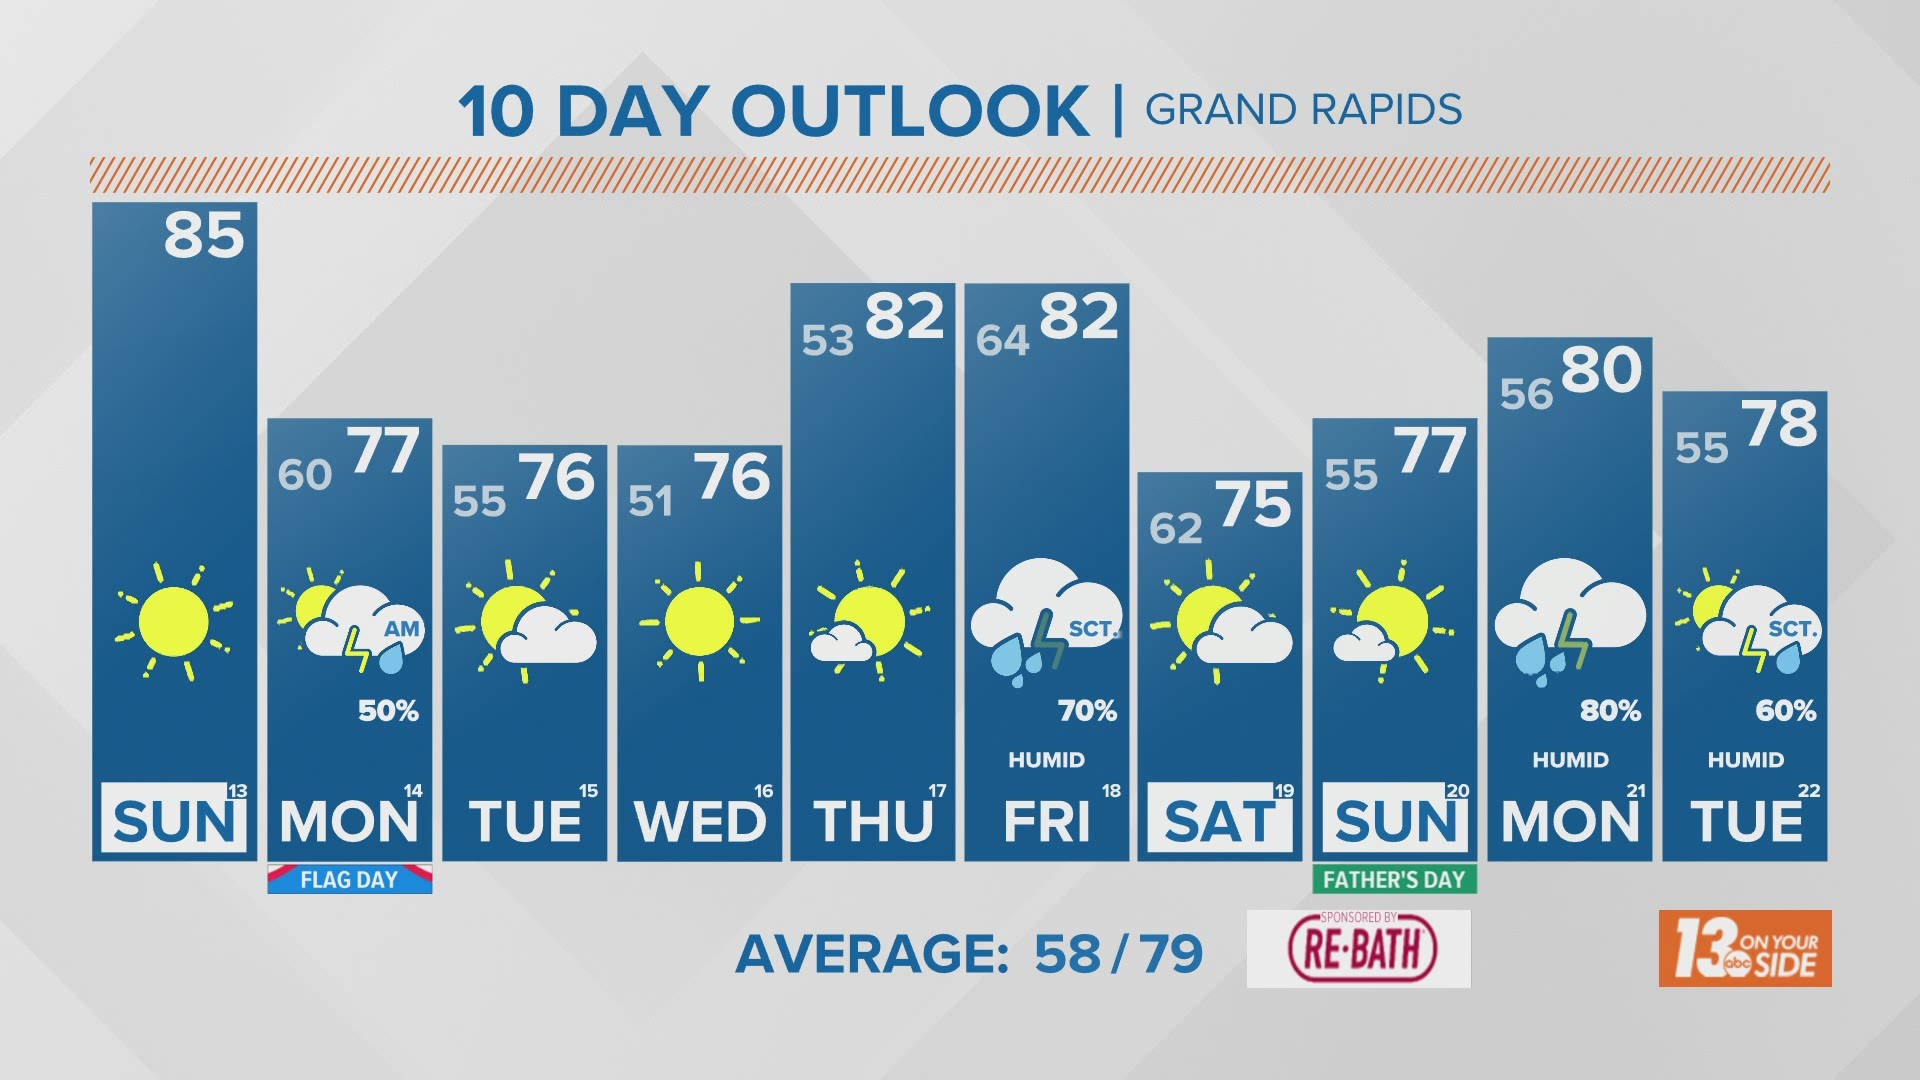 Plenty of sunshine and little rain in the 10-day forecast.